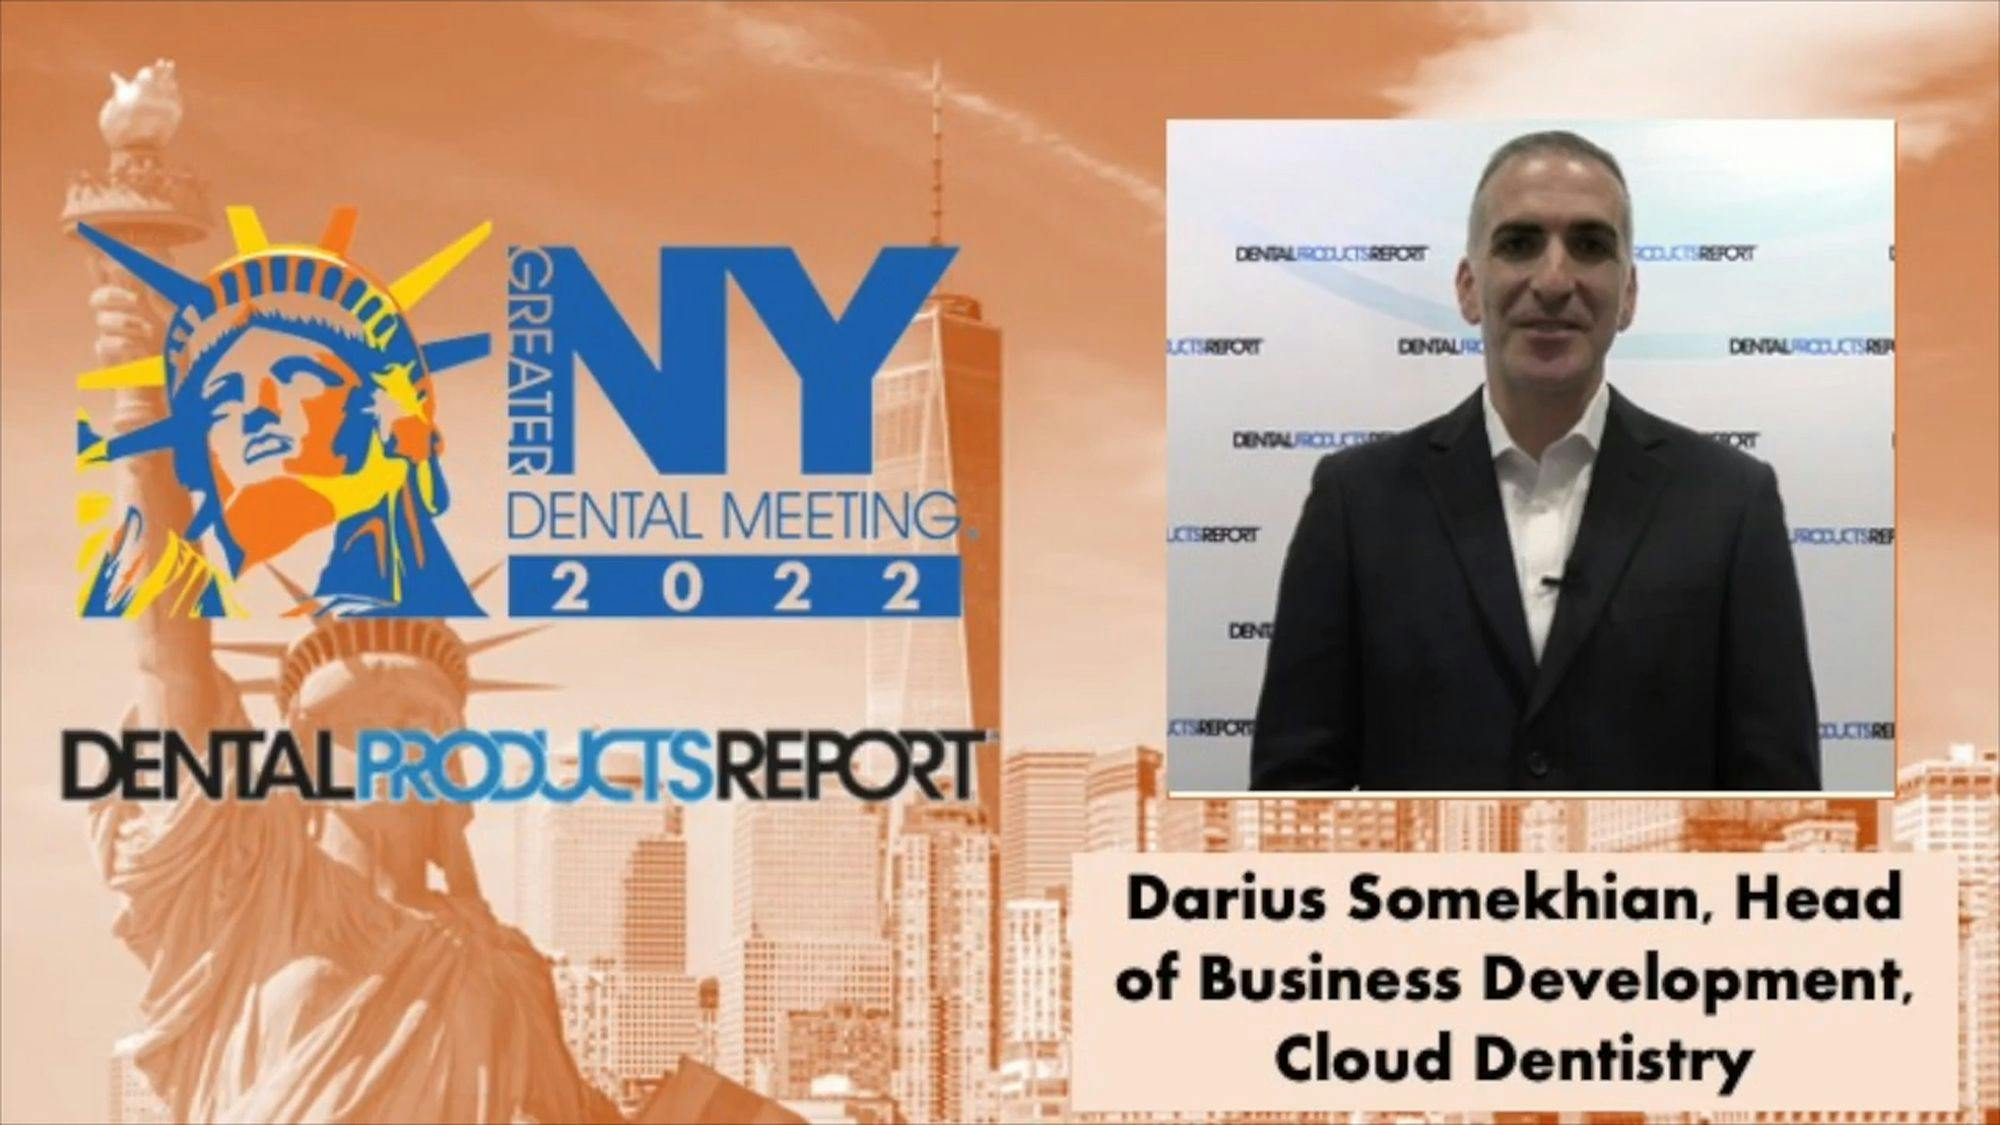 Greater New York Dental Meeting 2022: Interview with Head of Business Development at Cloud Dentistry Darius Somekhian